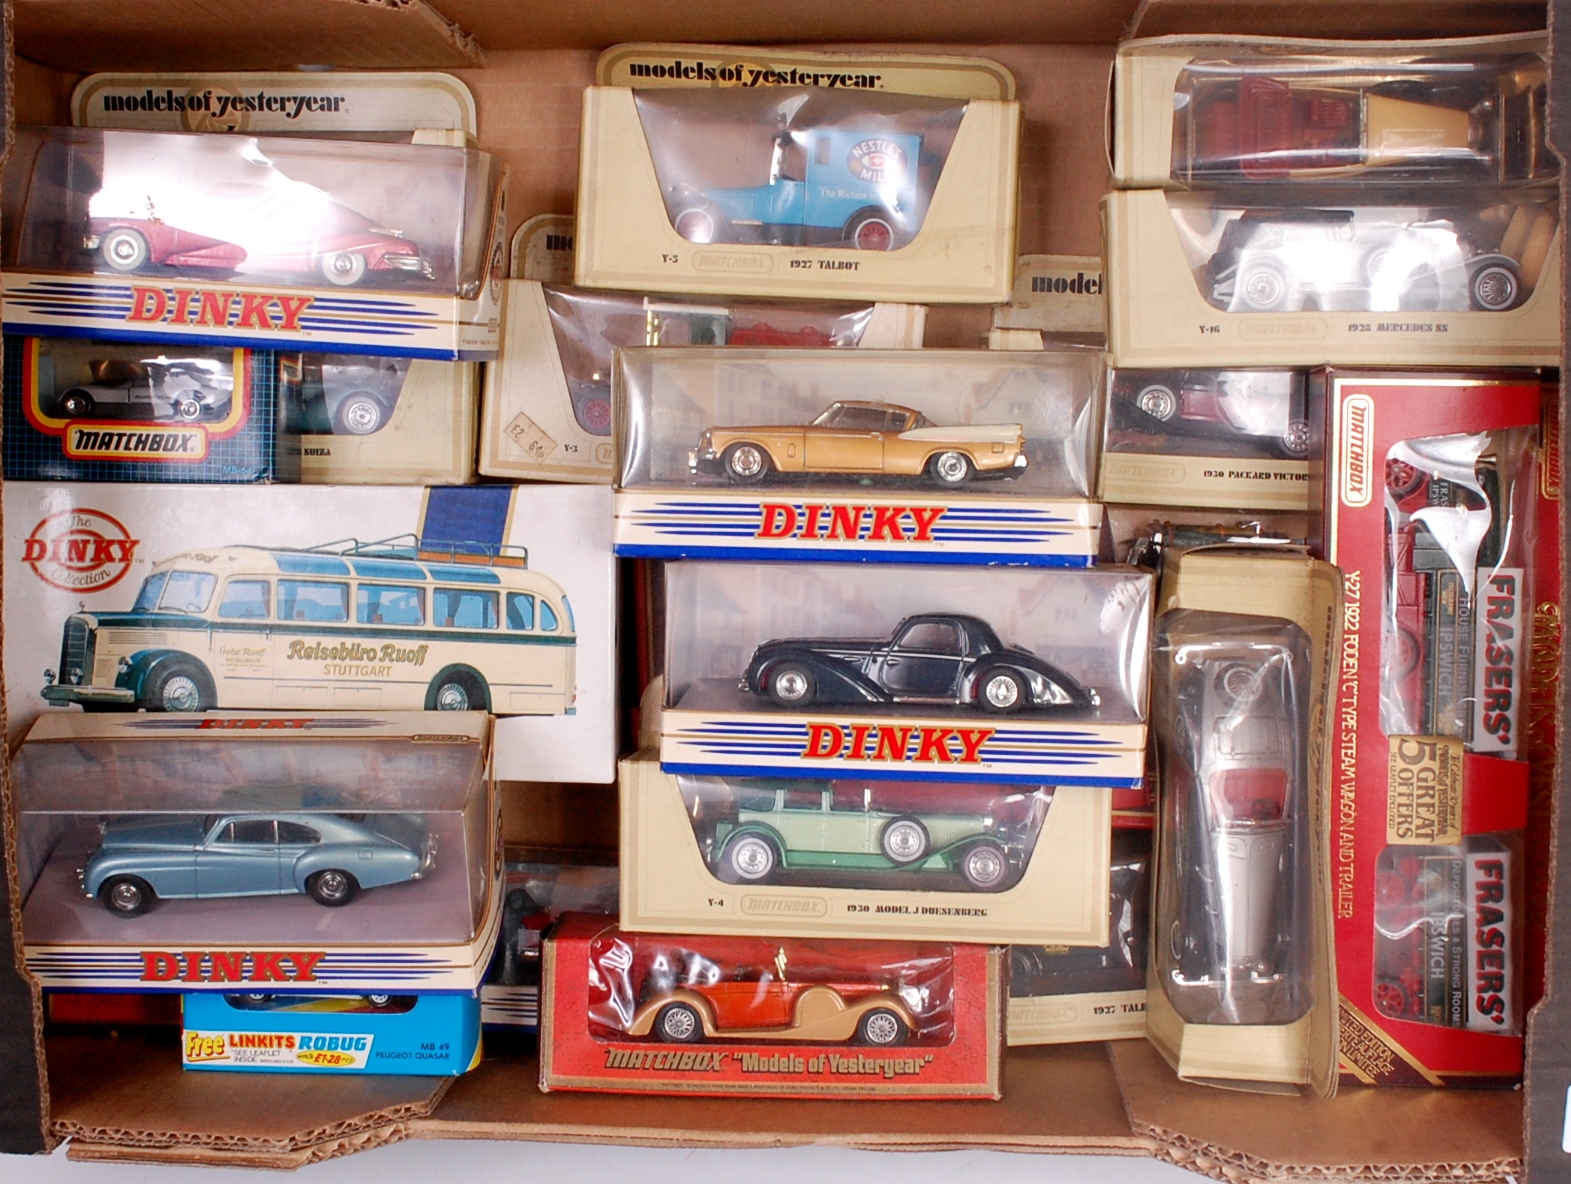 26 mixed issue Matchbox diecast vehicles, to include Matchbox Models of Yesteryear,